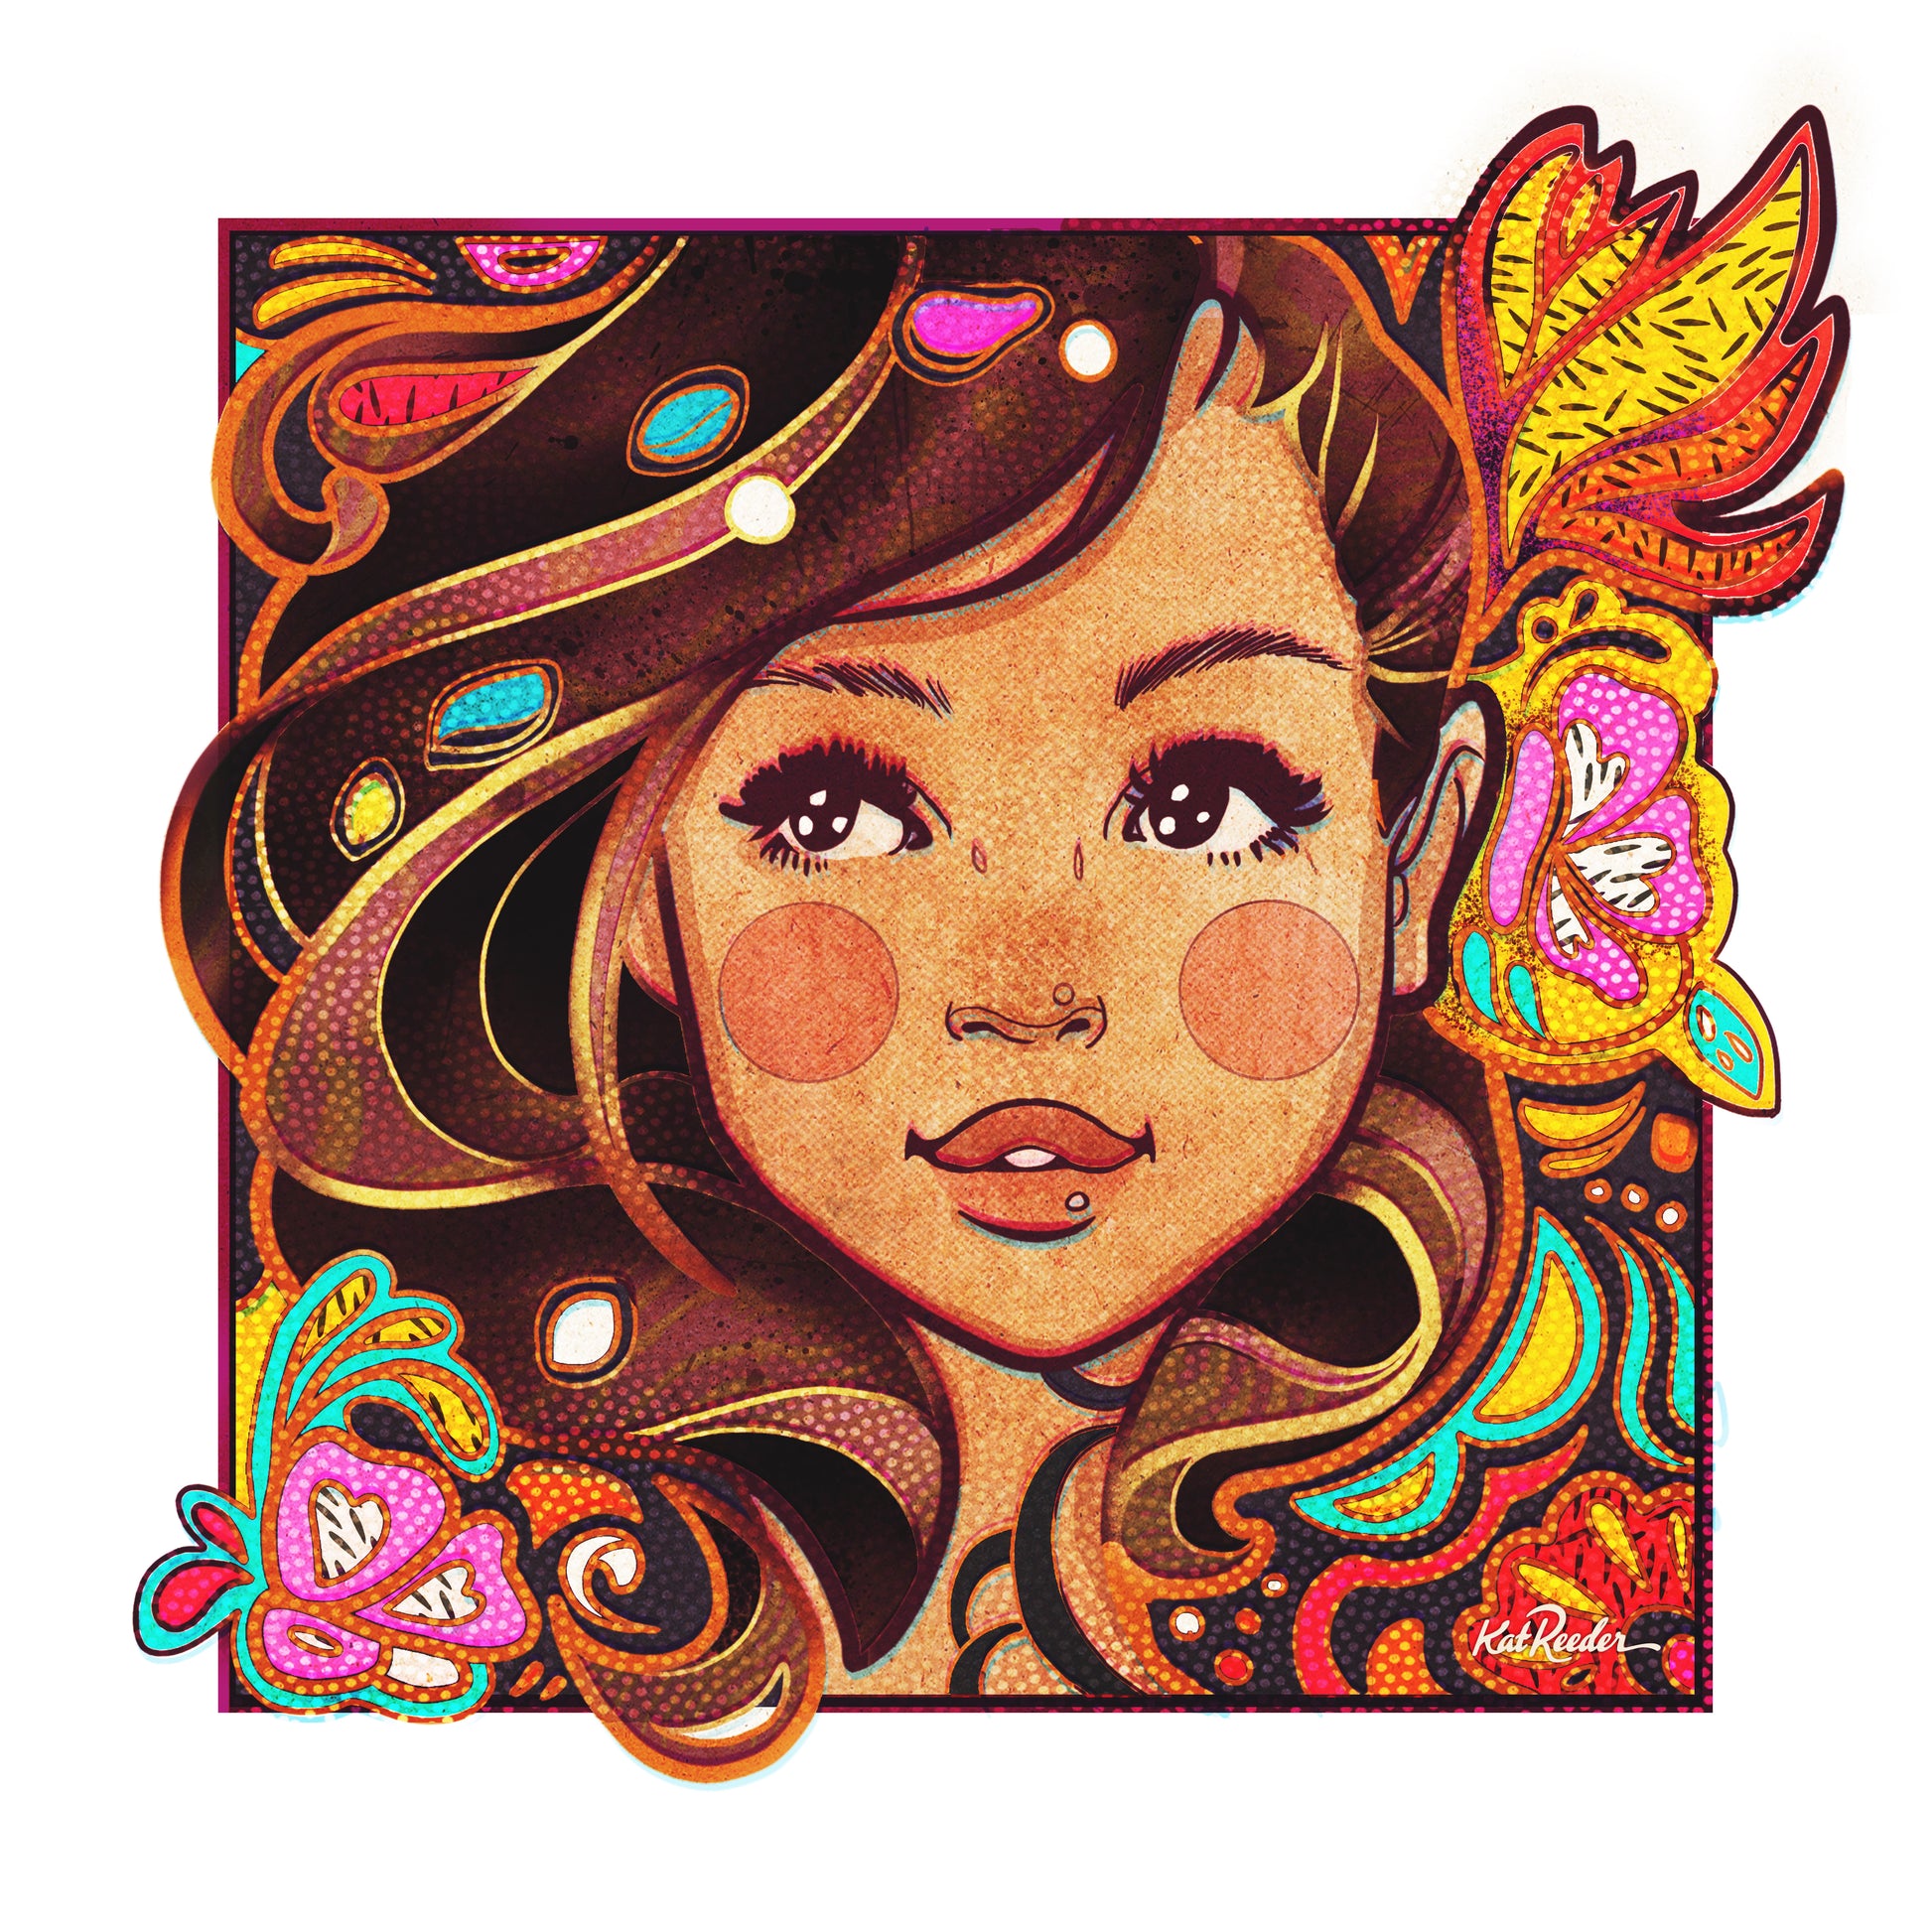 vintage-style illustration of the face of a young dark haired girl, surrounded by abstract flowers and swirls in the style of pucci and pop art